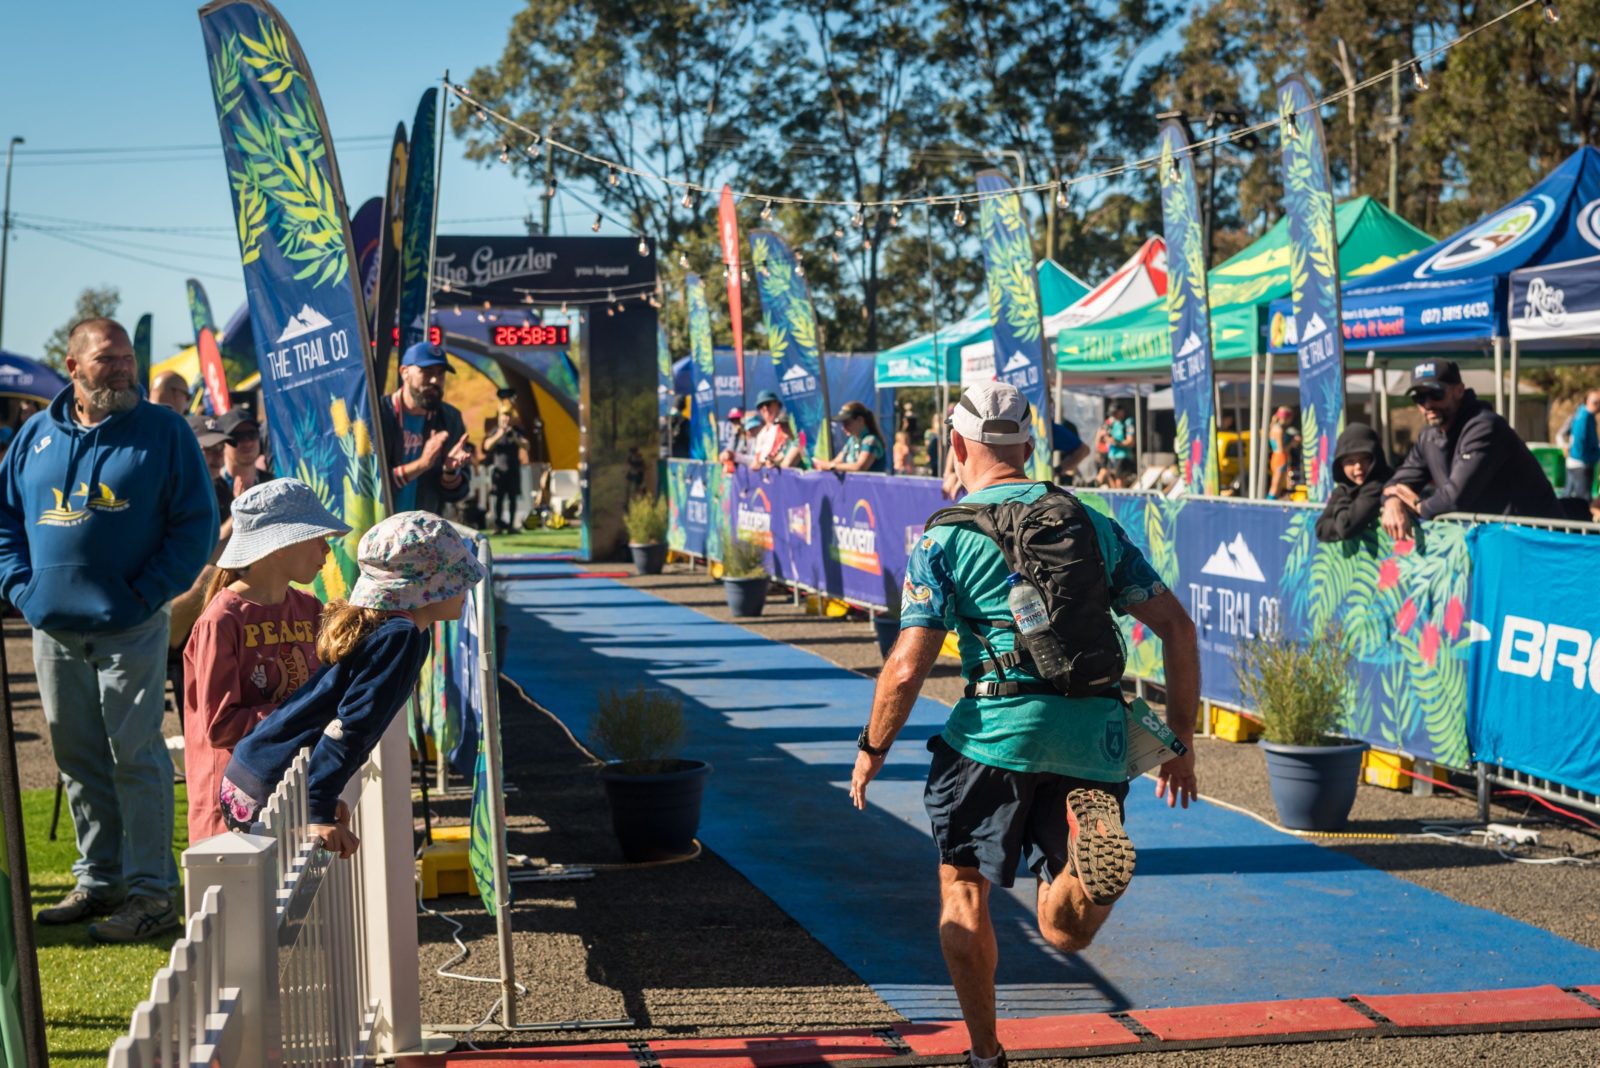 The Guzzler Ultra Finish chute lined with flags, spectators and tents